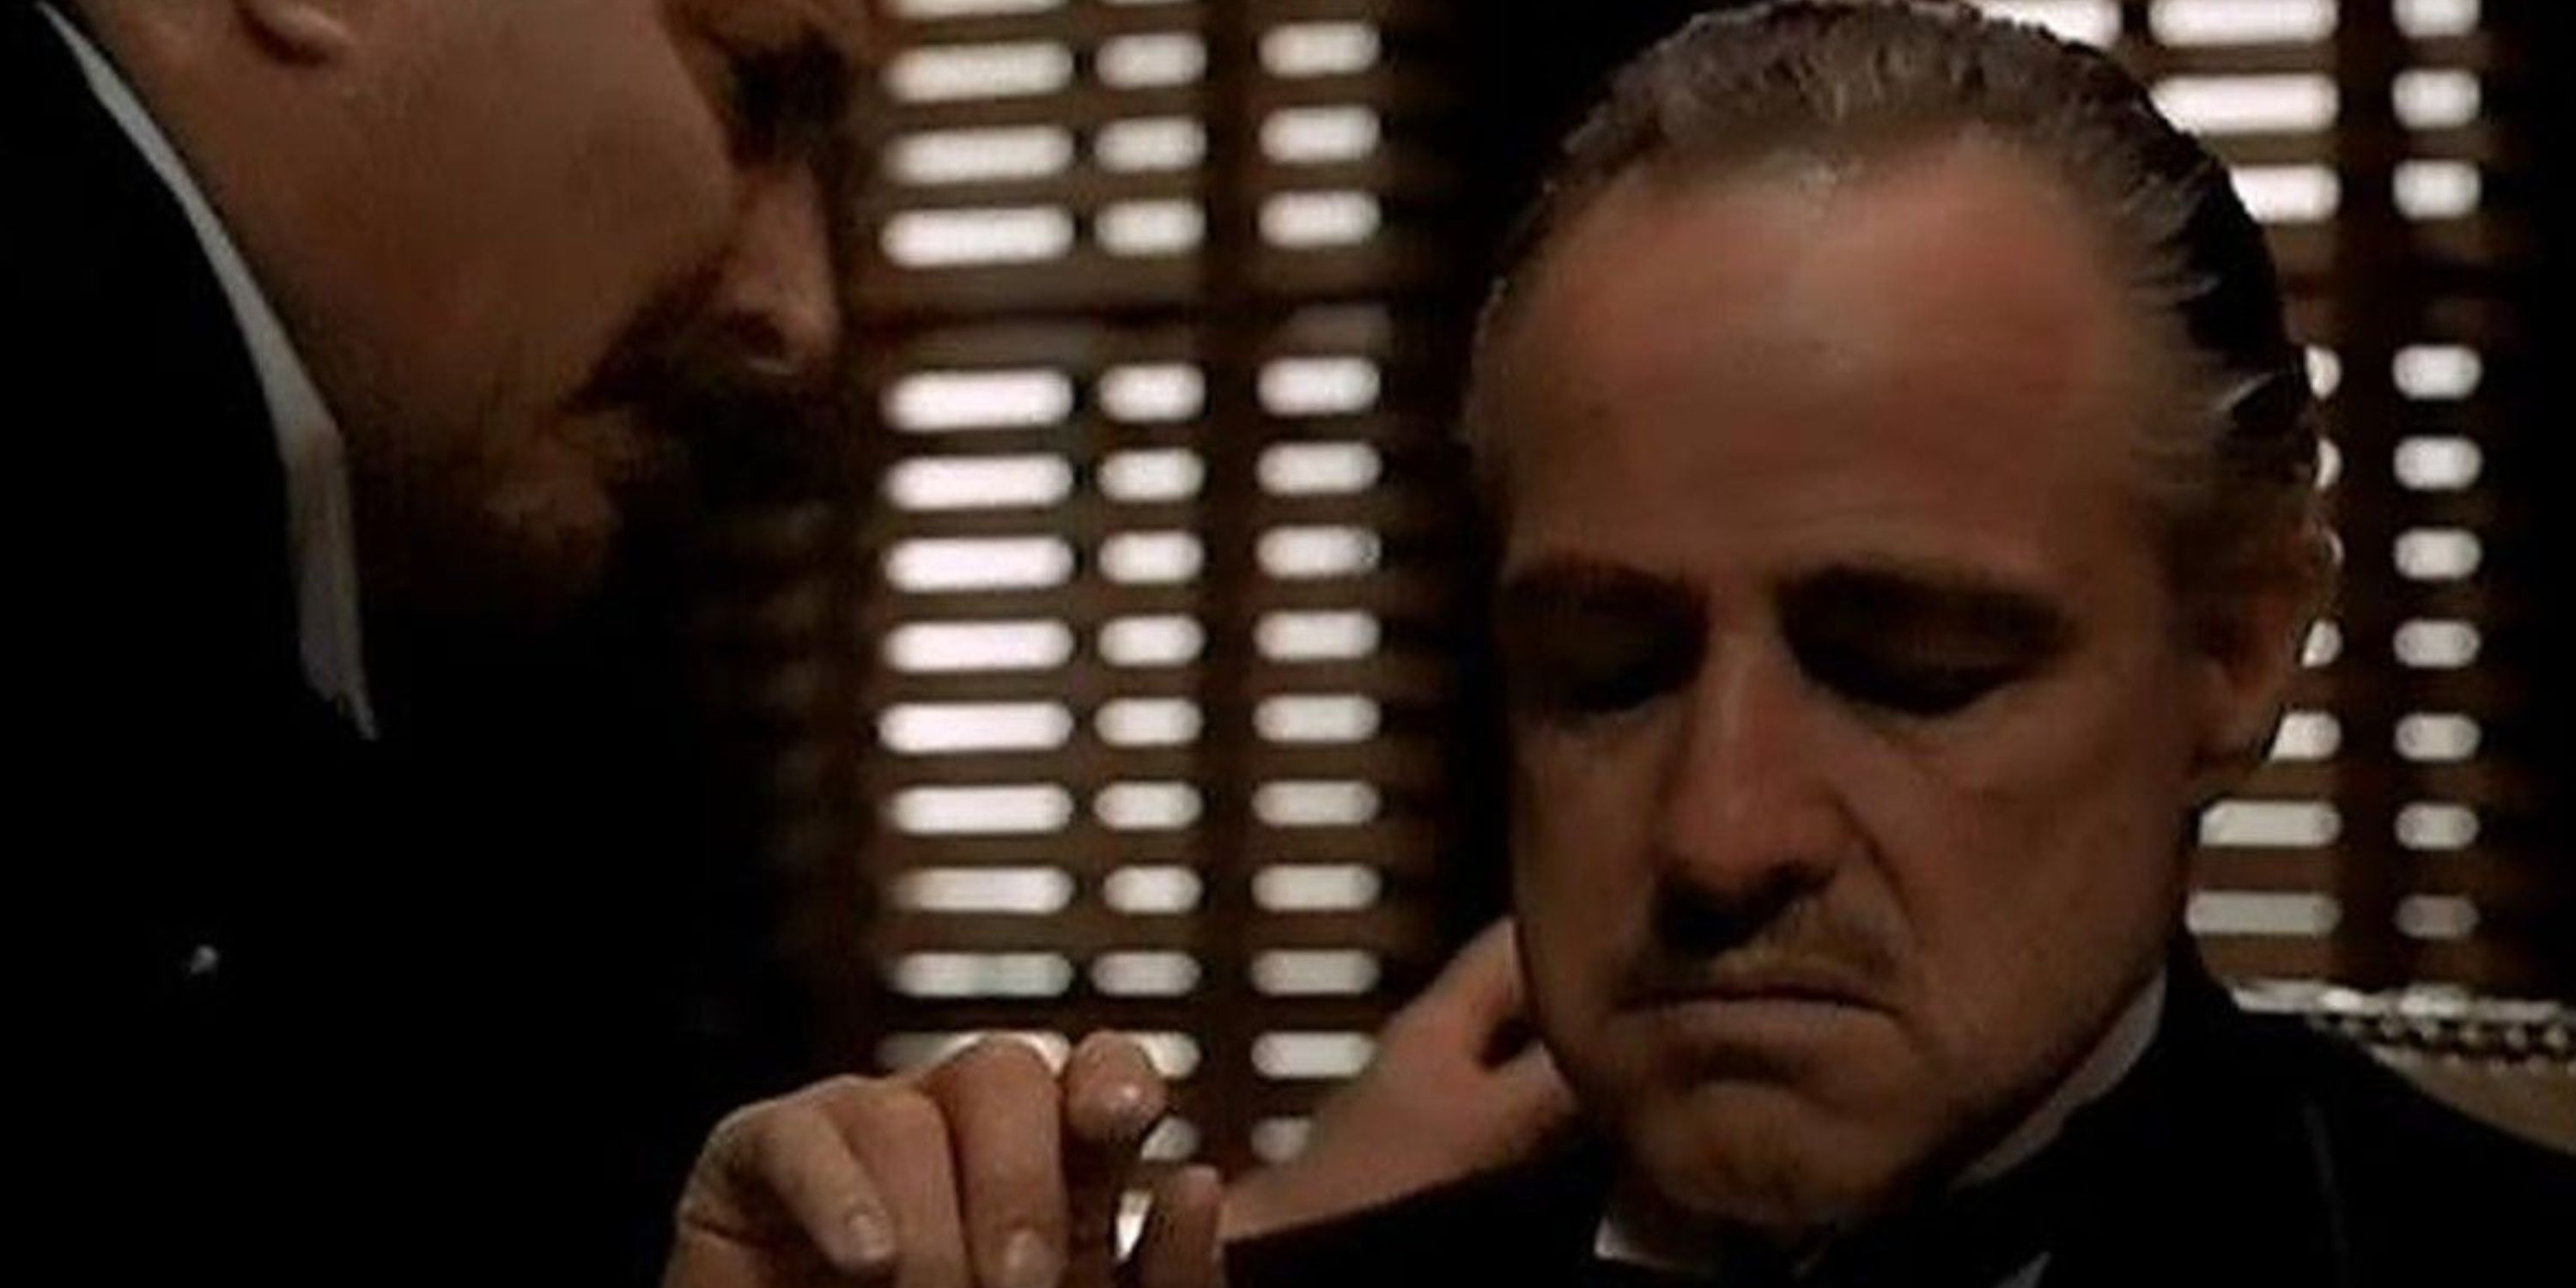 Vito Corleone meeting with Bonesara in The Godfather